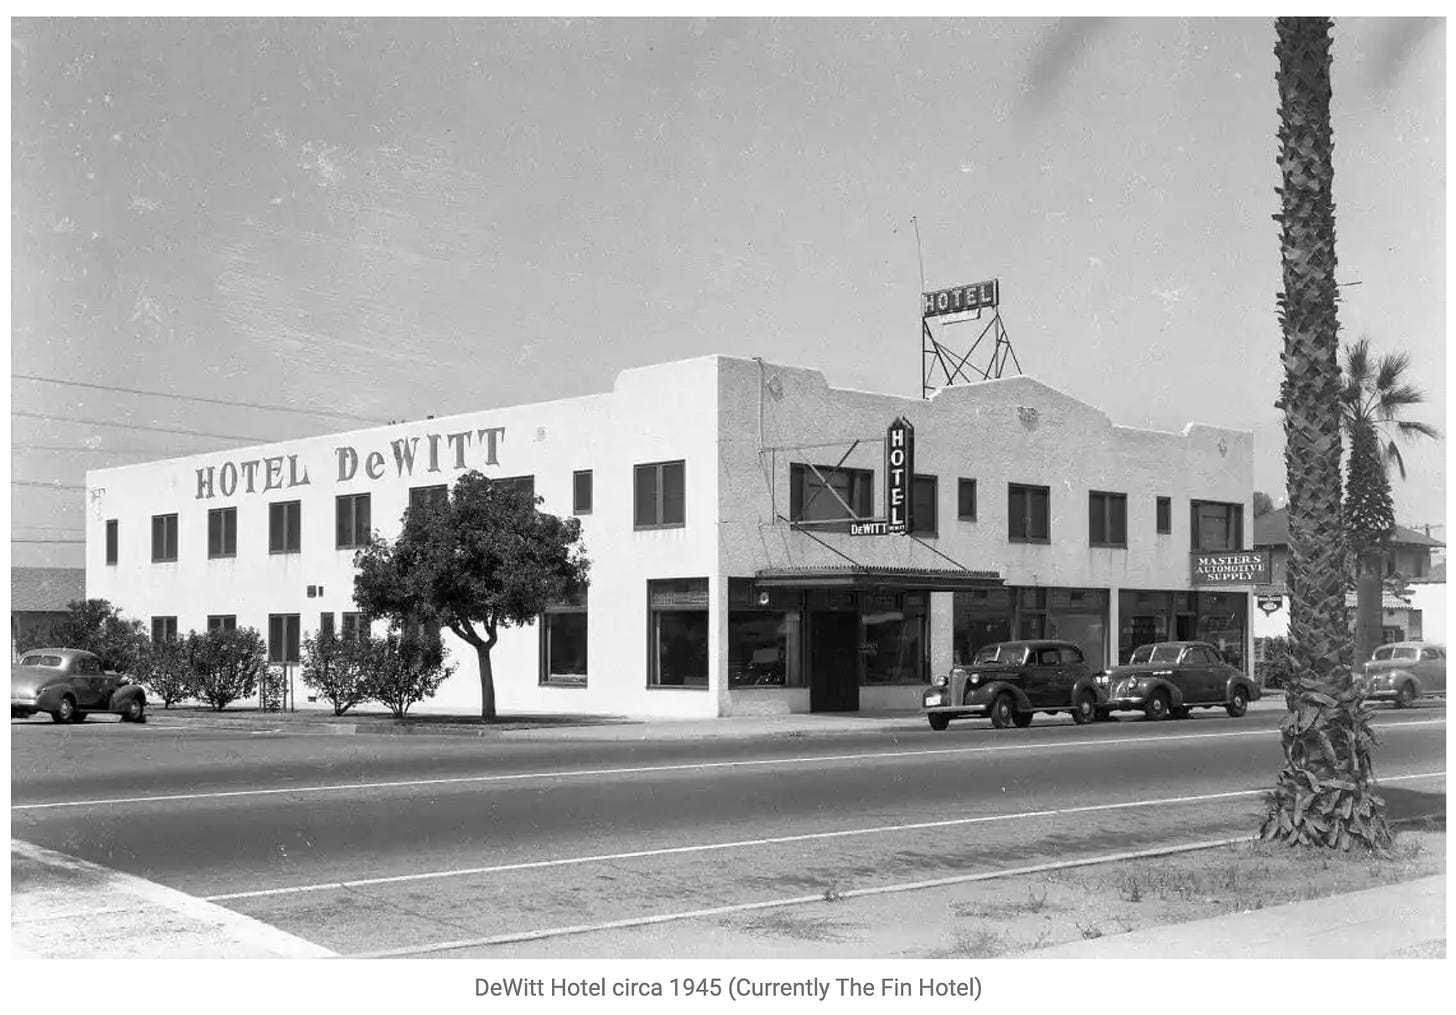 A corner view of a two-story block building with the name Hotel DeWitt painted on the side. The photo is black and white from 1945. Cars of the era are parked in front.